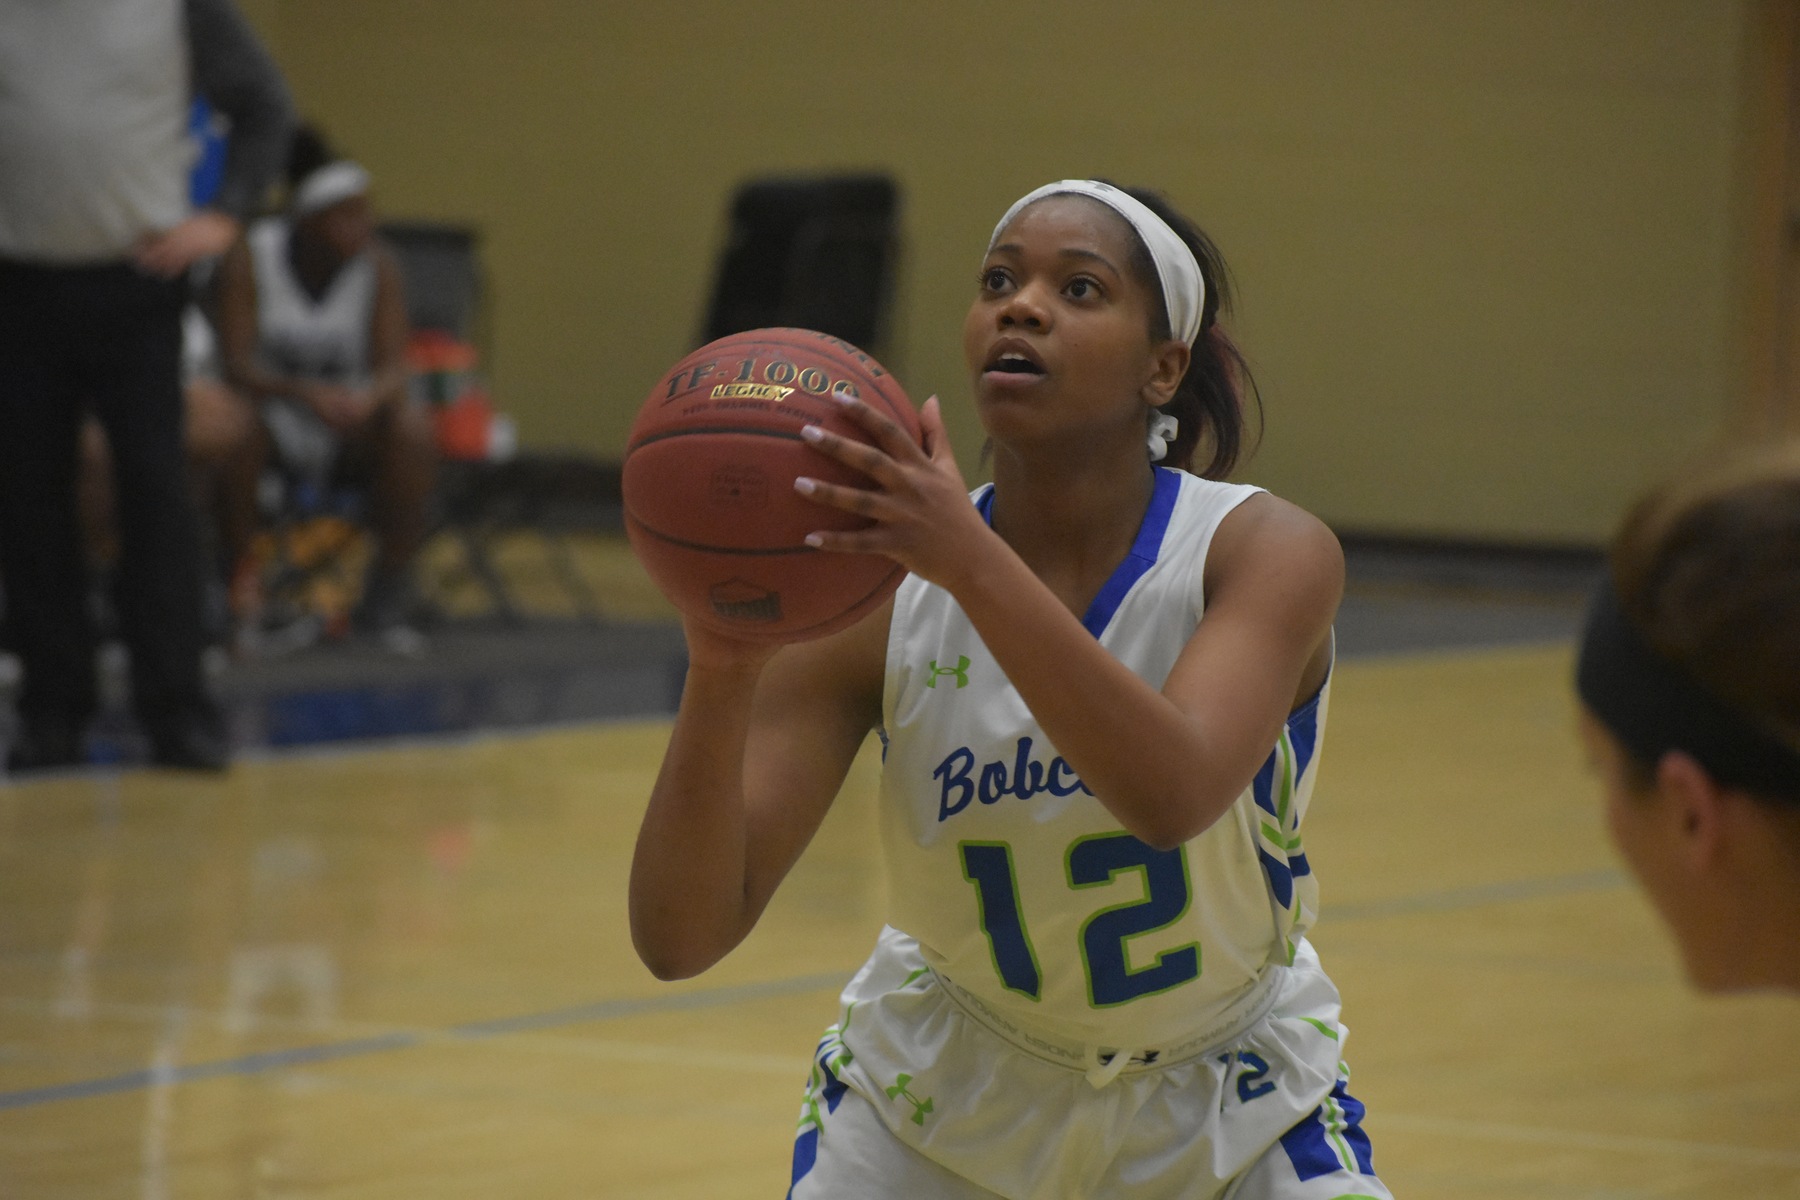 -- Ashley Williams (pictured) and the Bobcats zero in on playoff journey --